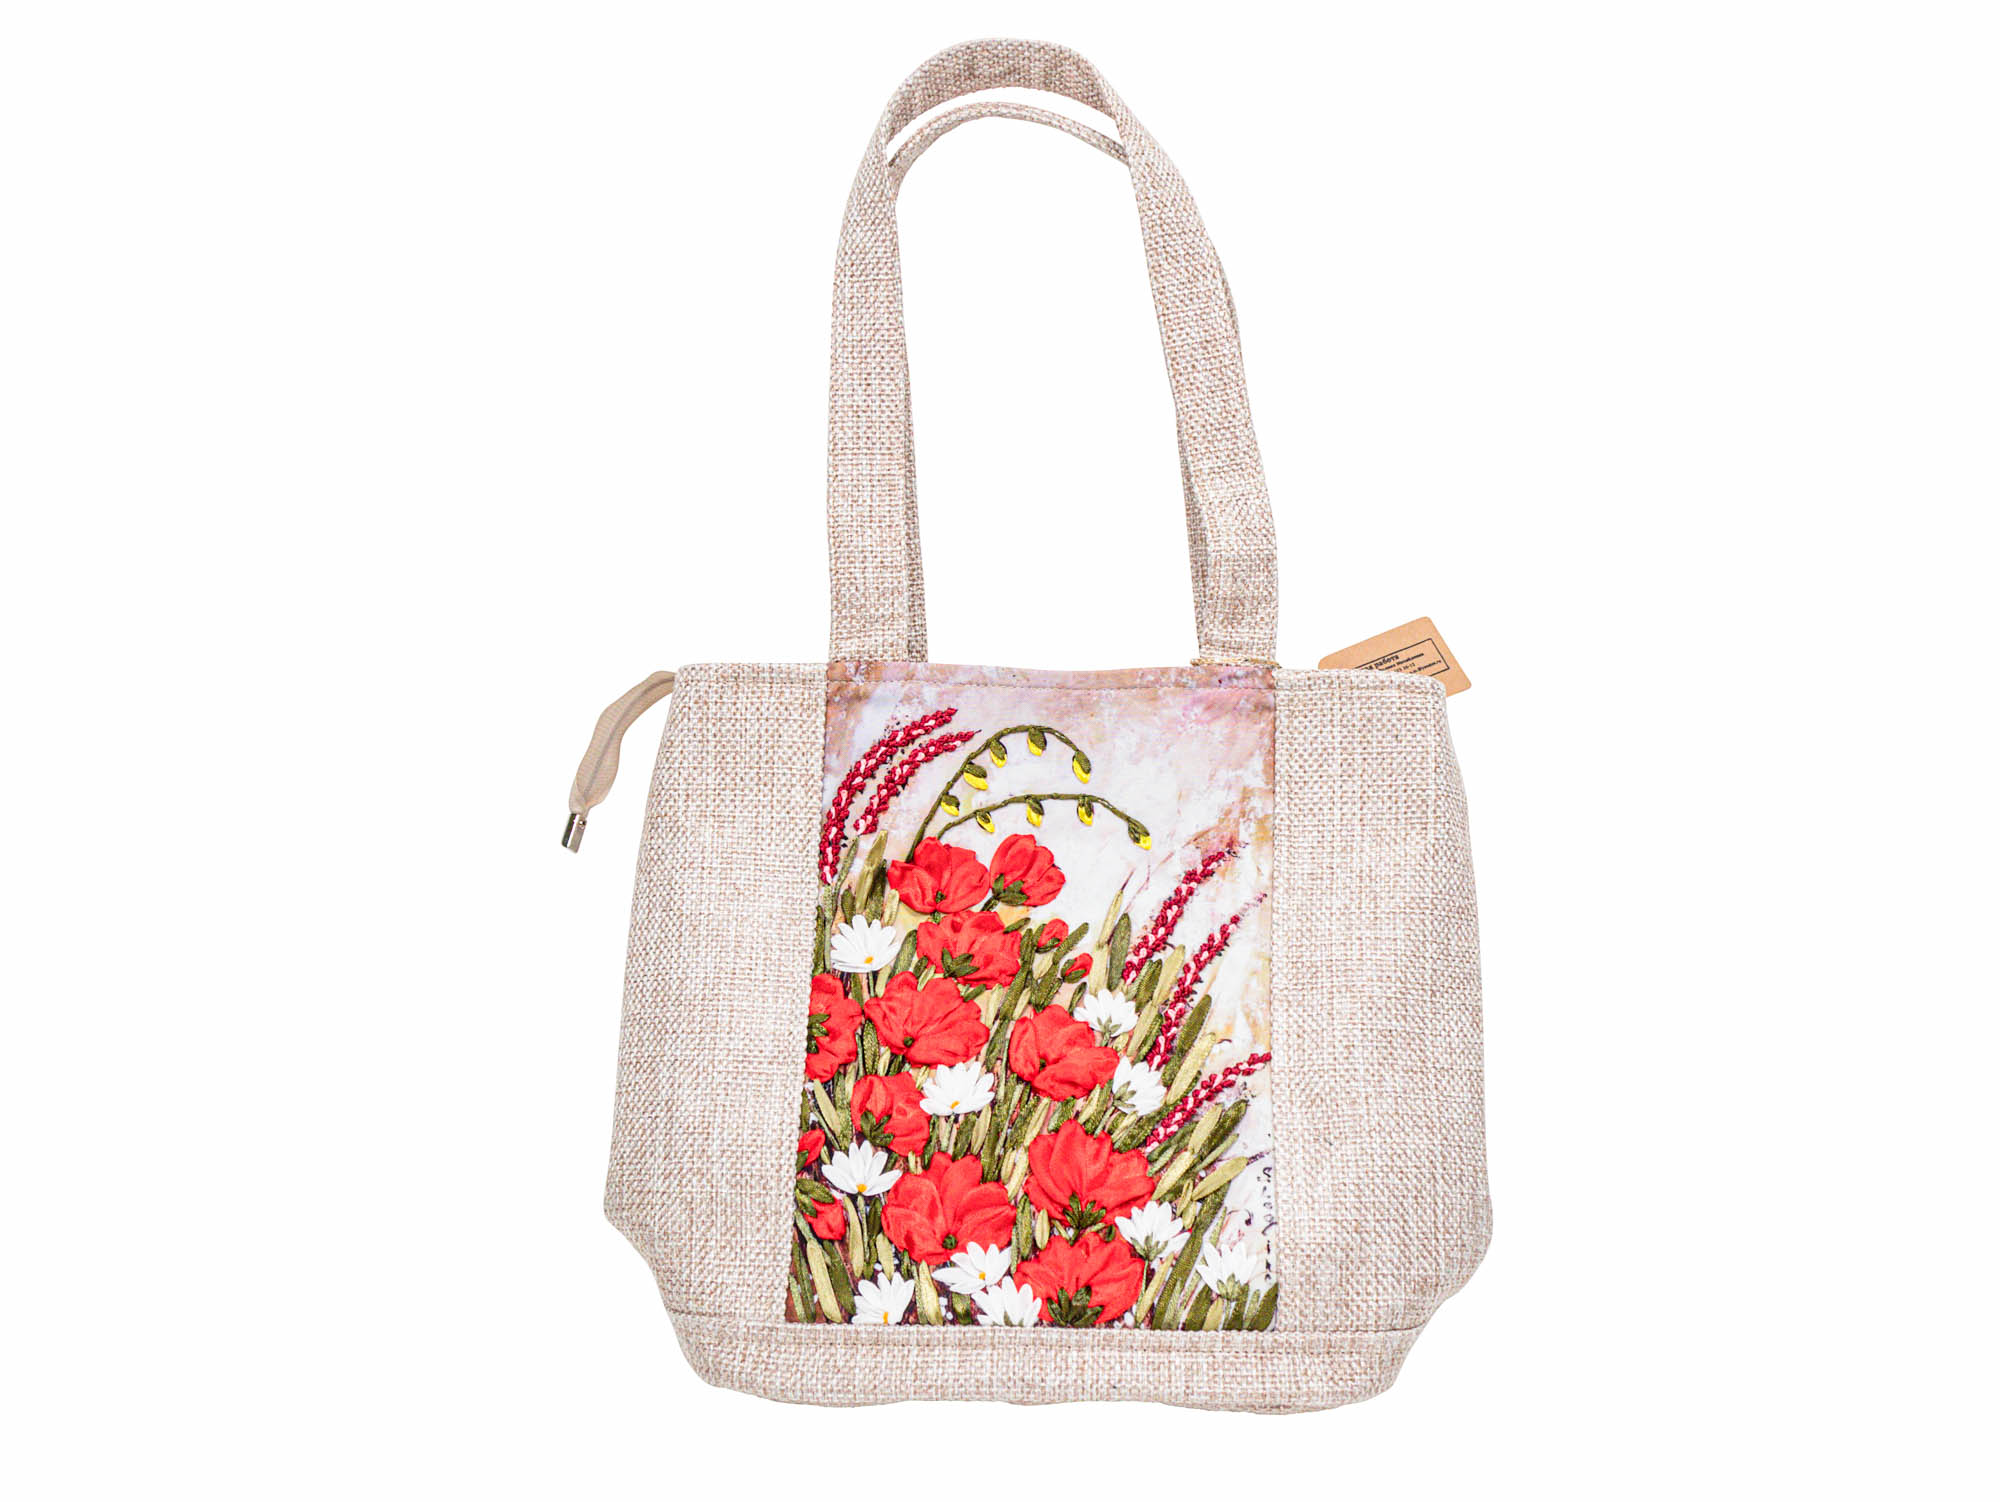 Hand Embroidered Burlap Tote Bag: Gallery Item - 1379-30-G4967 (9UL8)